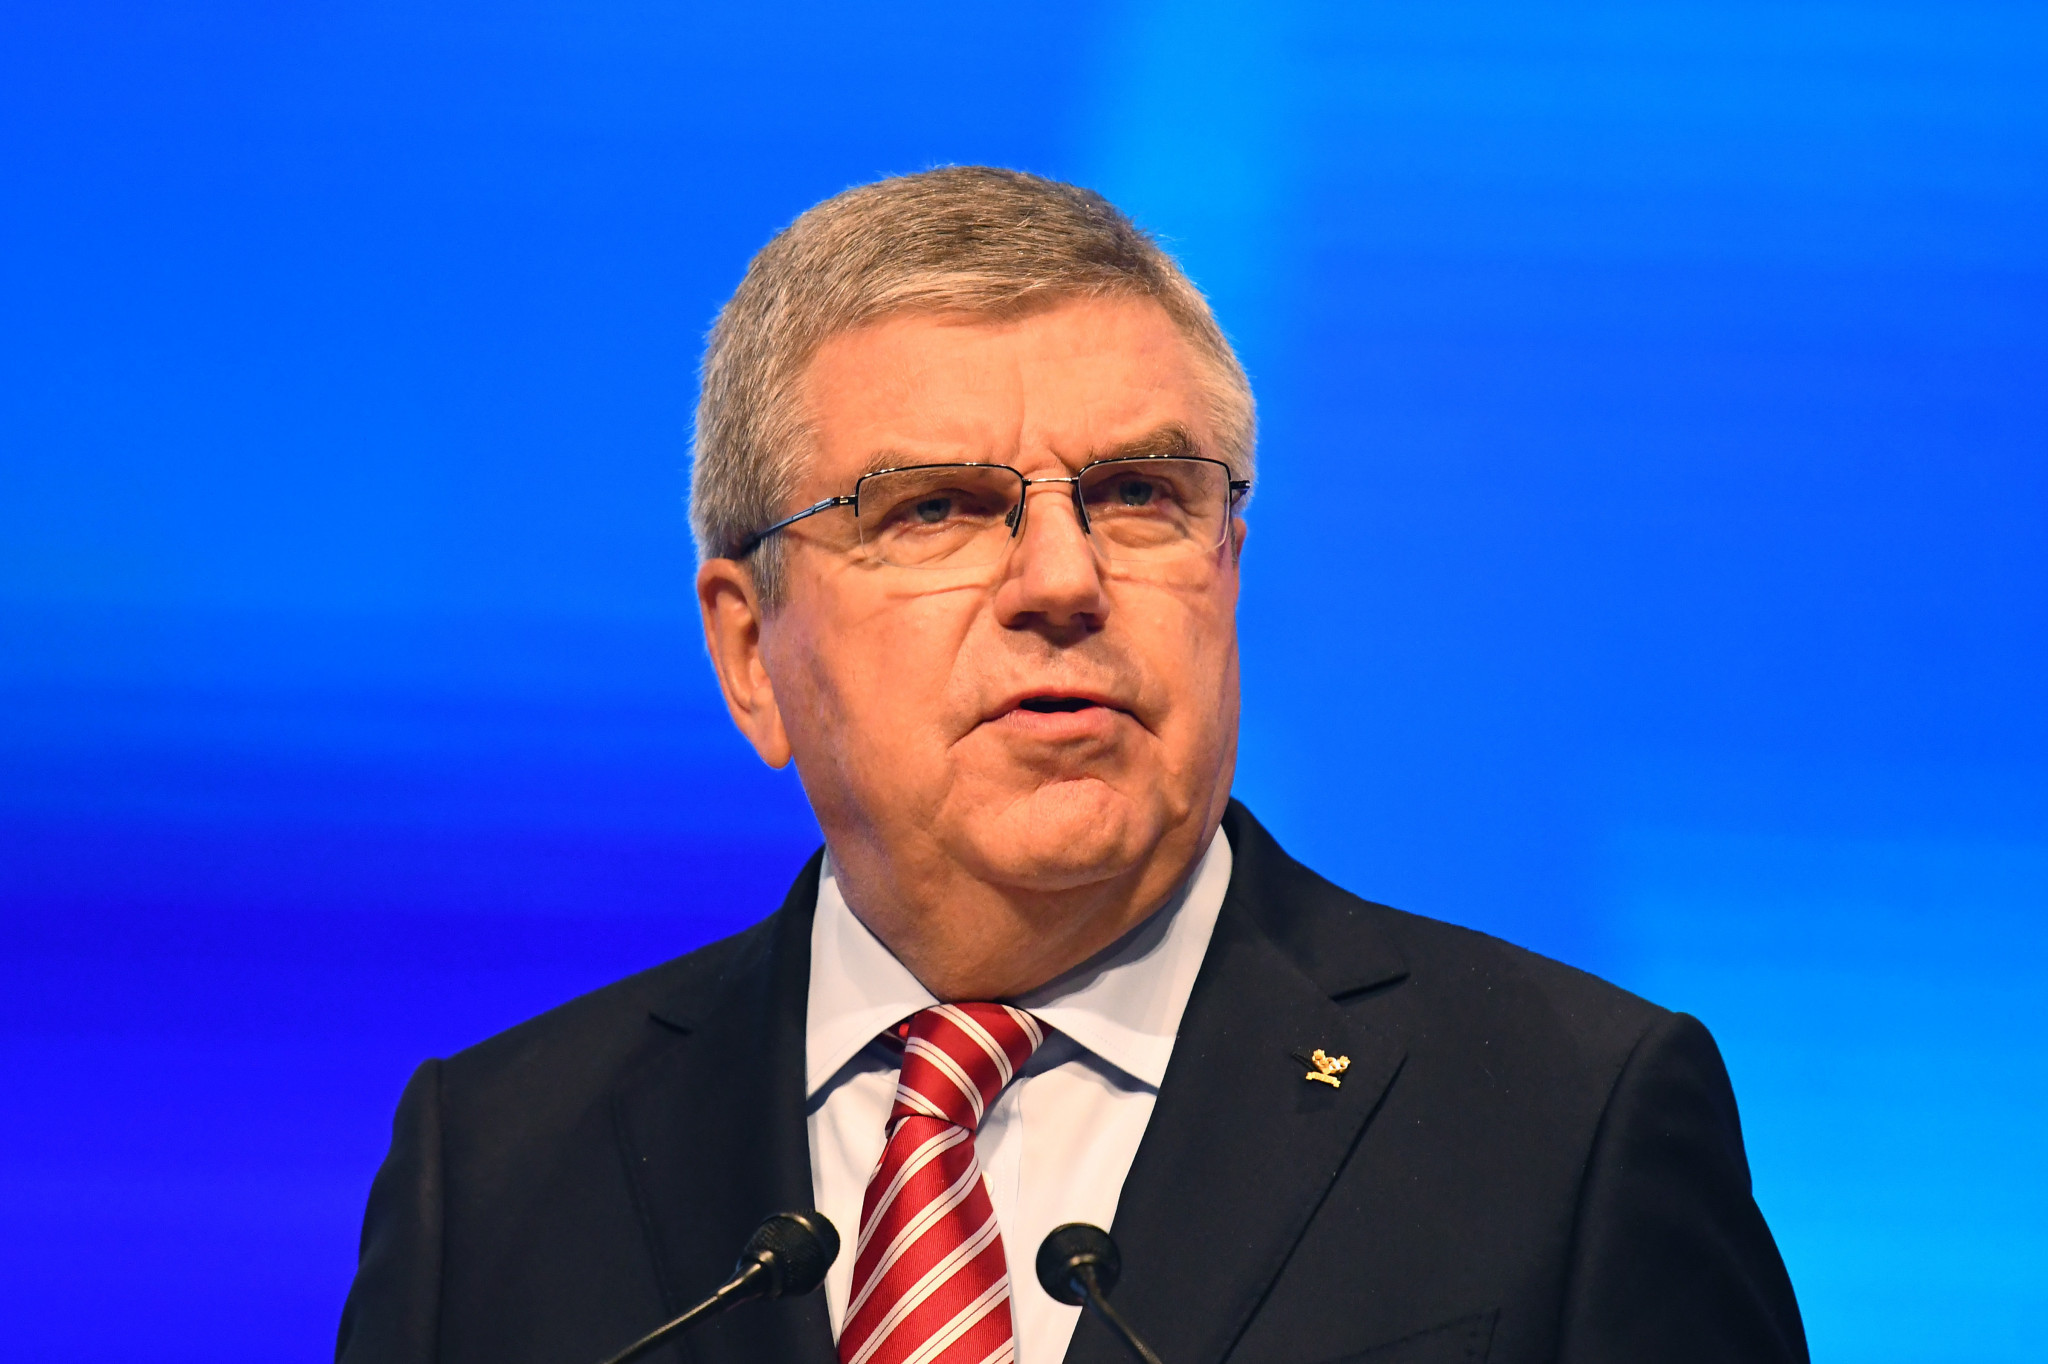 IOC President Thomas Bach confirmed they had received an official bid from Indonesia for the 2032 Olympics ©Getty Images